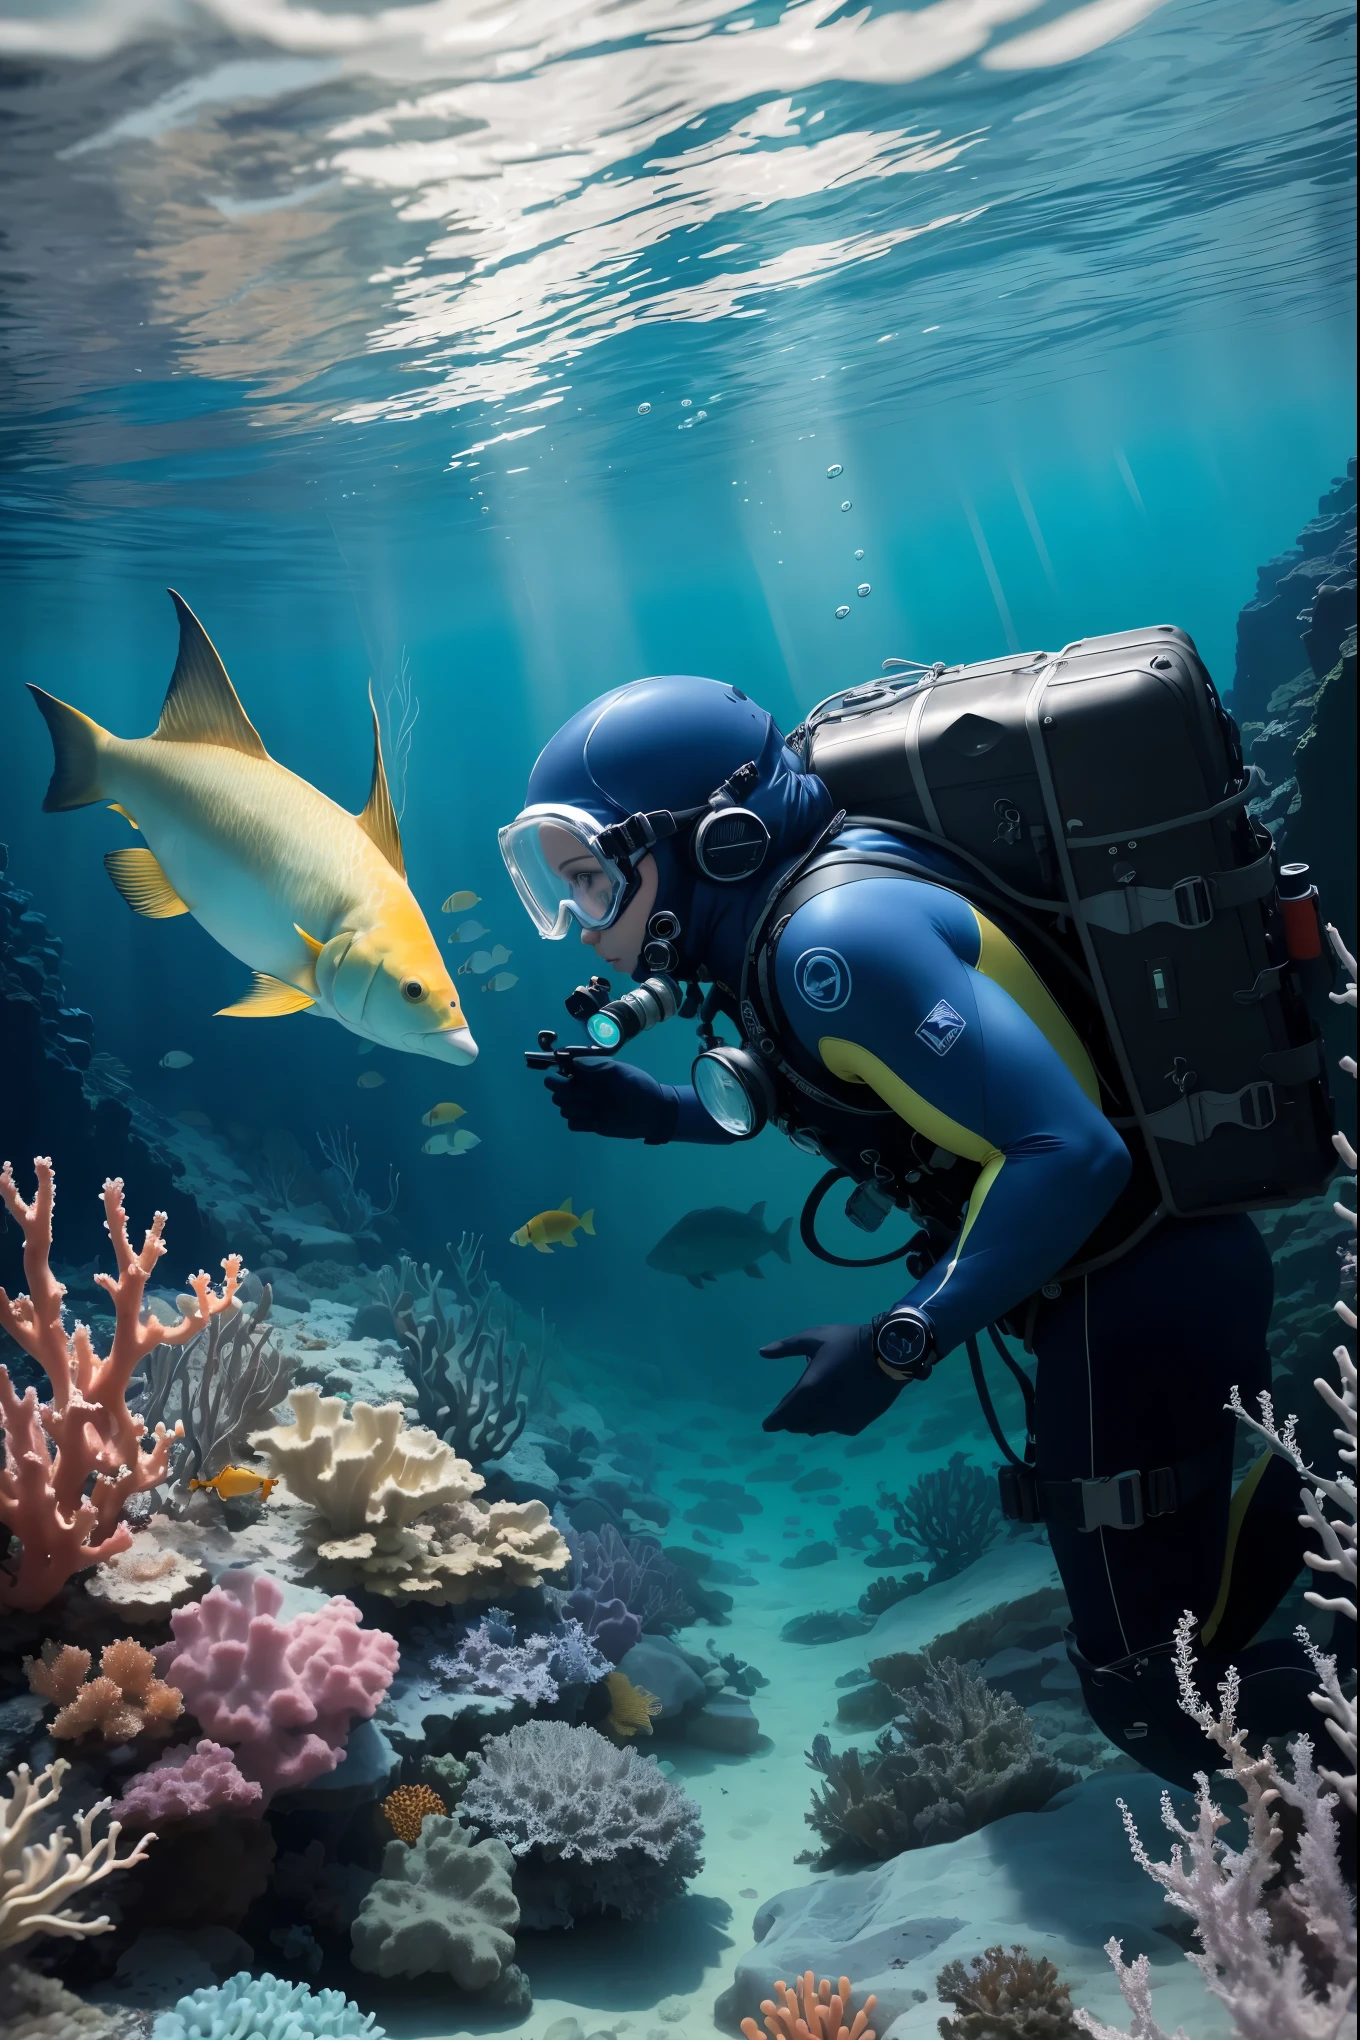 a professional diver exploring underwater, wearing a diving suit and carrying diving equipment, surrounded by colorful coral and marine life
Stable Diffusion: (best quality,4k,8k,highres,masterpiece:1.2),ultra-detailed,(realistic,photorealistic,photo-realistic:1.37),underwater photography,stunning marine,professional diver,diving suit,diving gear,colorful coral,marine life,vivid colors,underwater exploration,clear water,marine environment,aquatic adventure